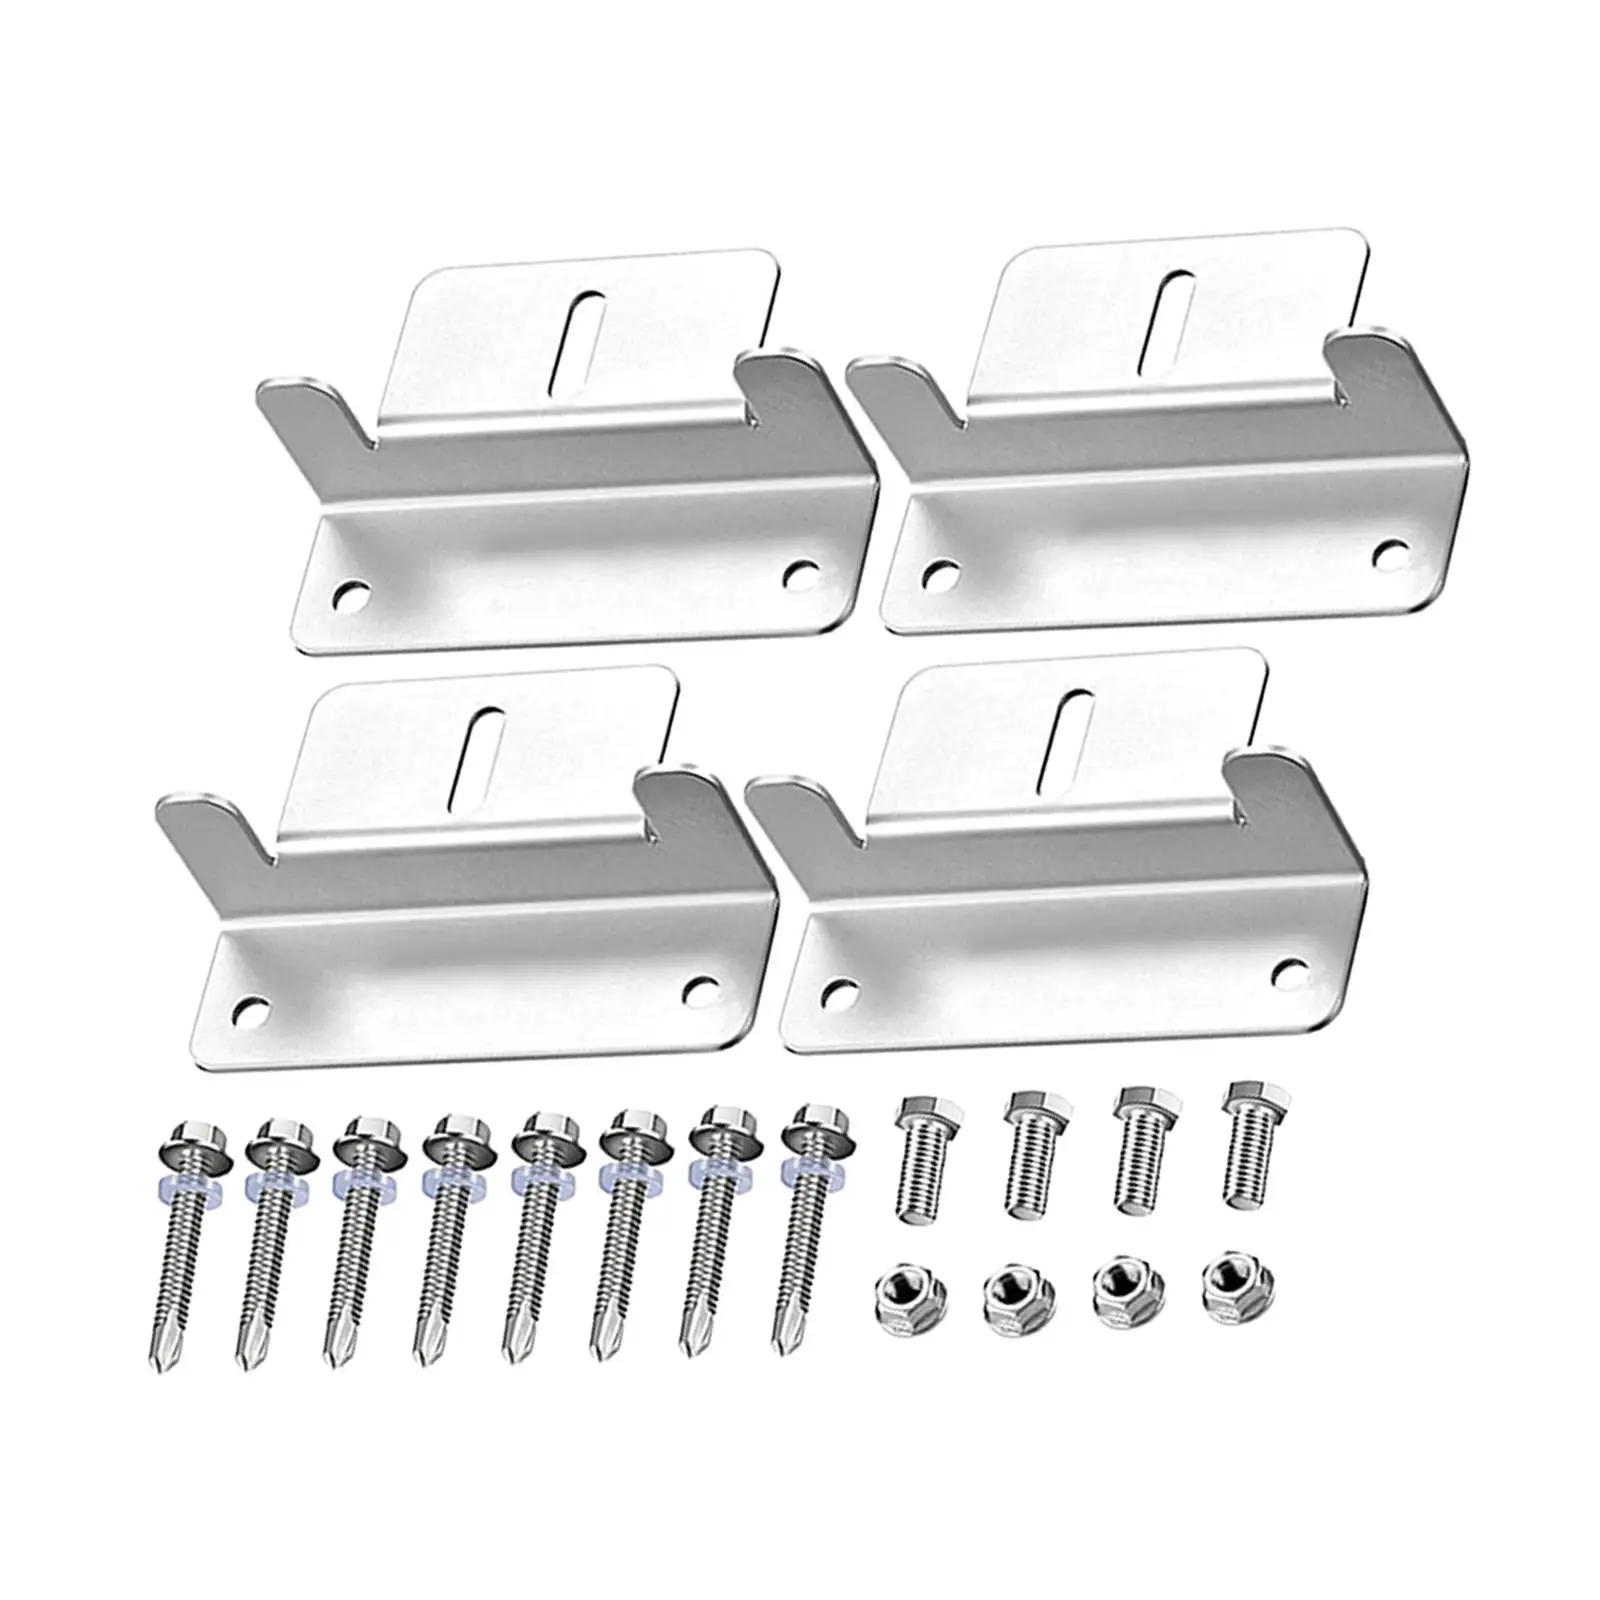 4x Z Bracket Adjustable Mount Support Accessories for Other Off Gird Roof Yachts